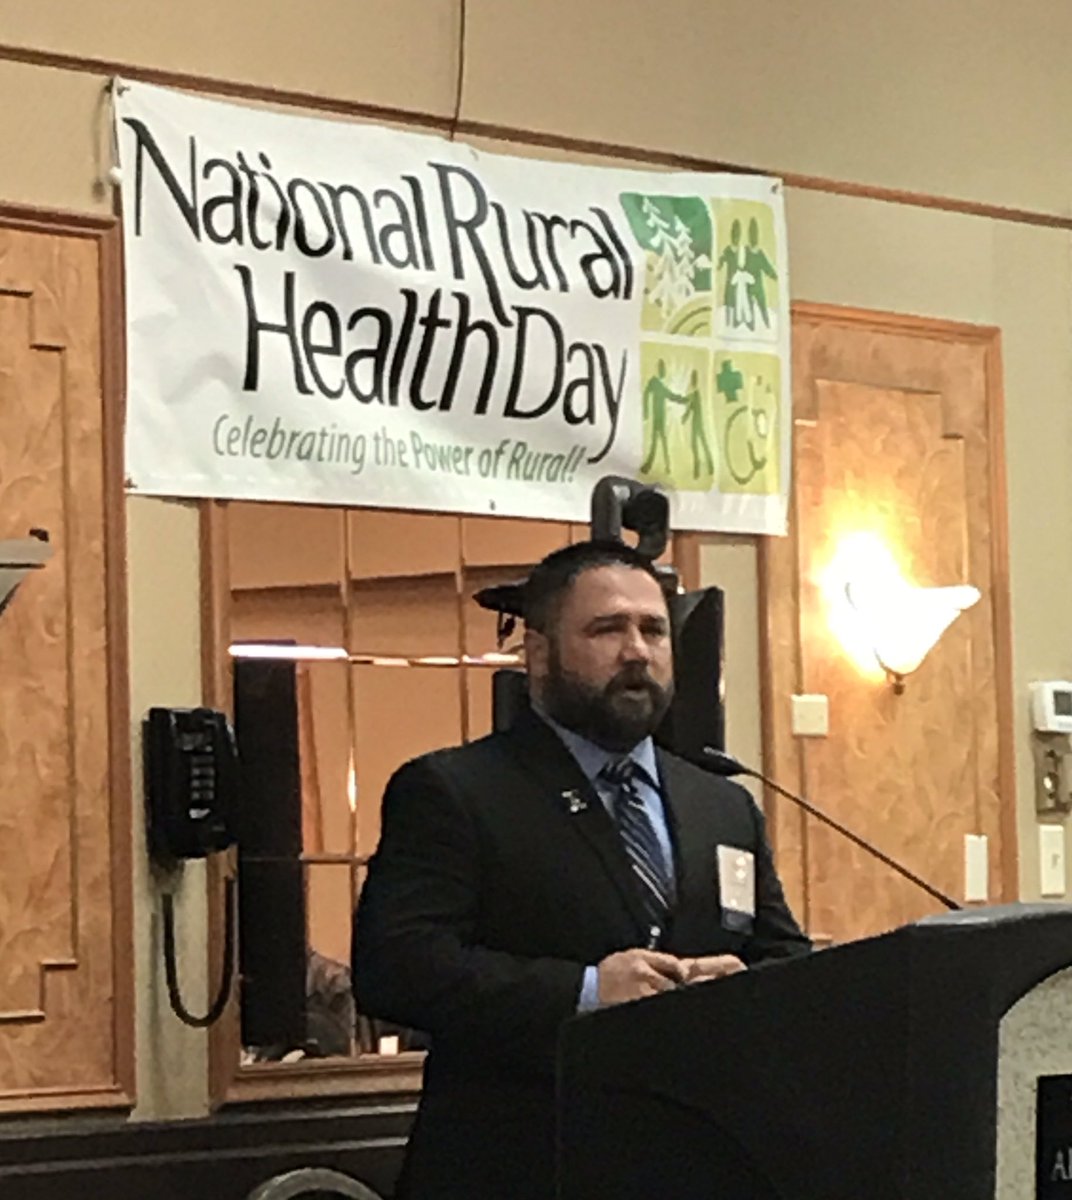 Listening to Chris Marchand promoting @ProjectECHO @ECHONevada on National Rural Health Day at the Nevada Rural Health Summit! #OurRural